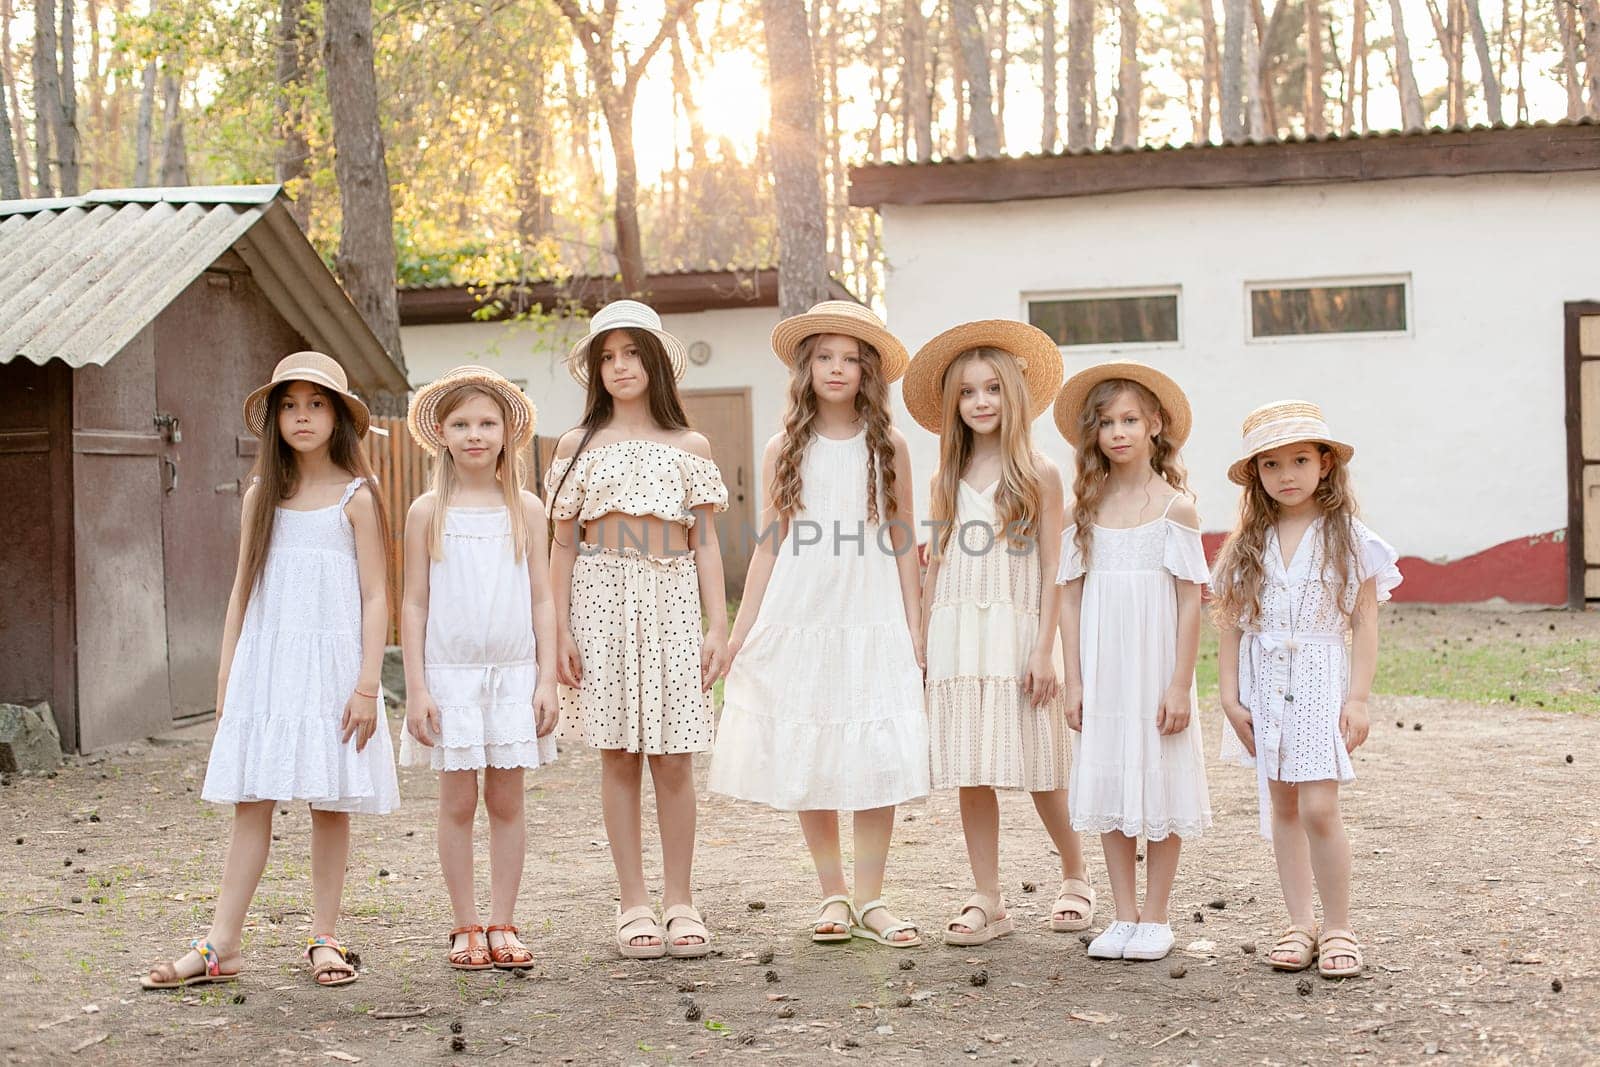 Trendy stylish preteen girls in similar light dresses and wicker hats with brim standing in backyard of country house located in forest against backdrop of outbuildings and tall trees in summer